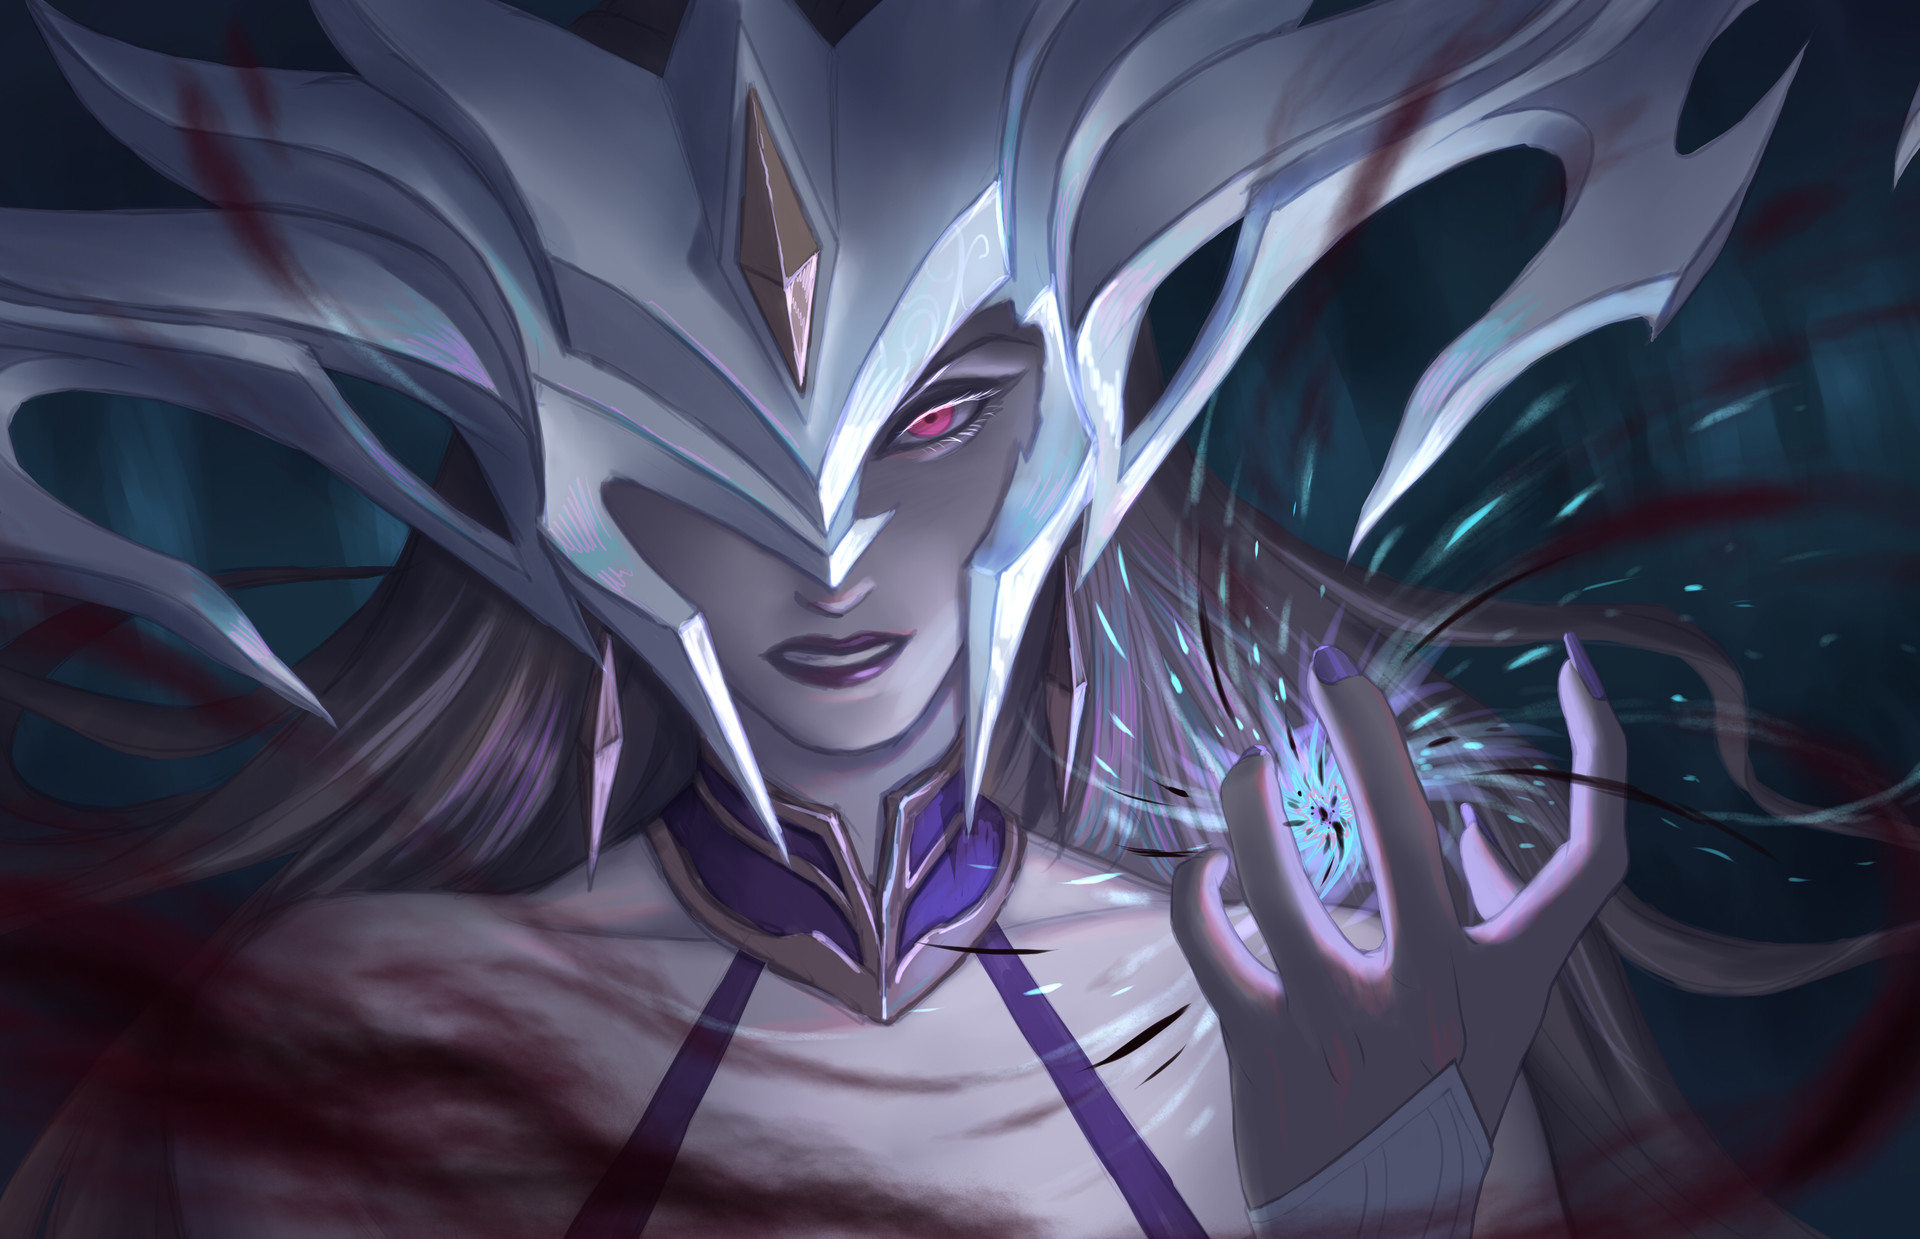 Coven Lissandra by 小山 满